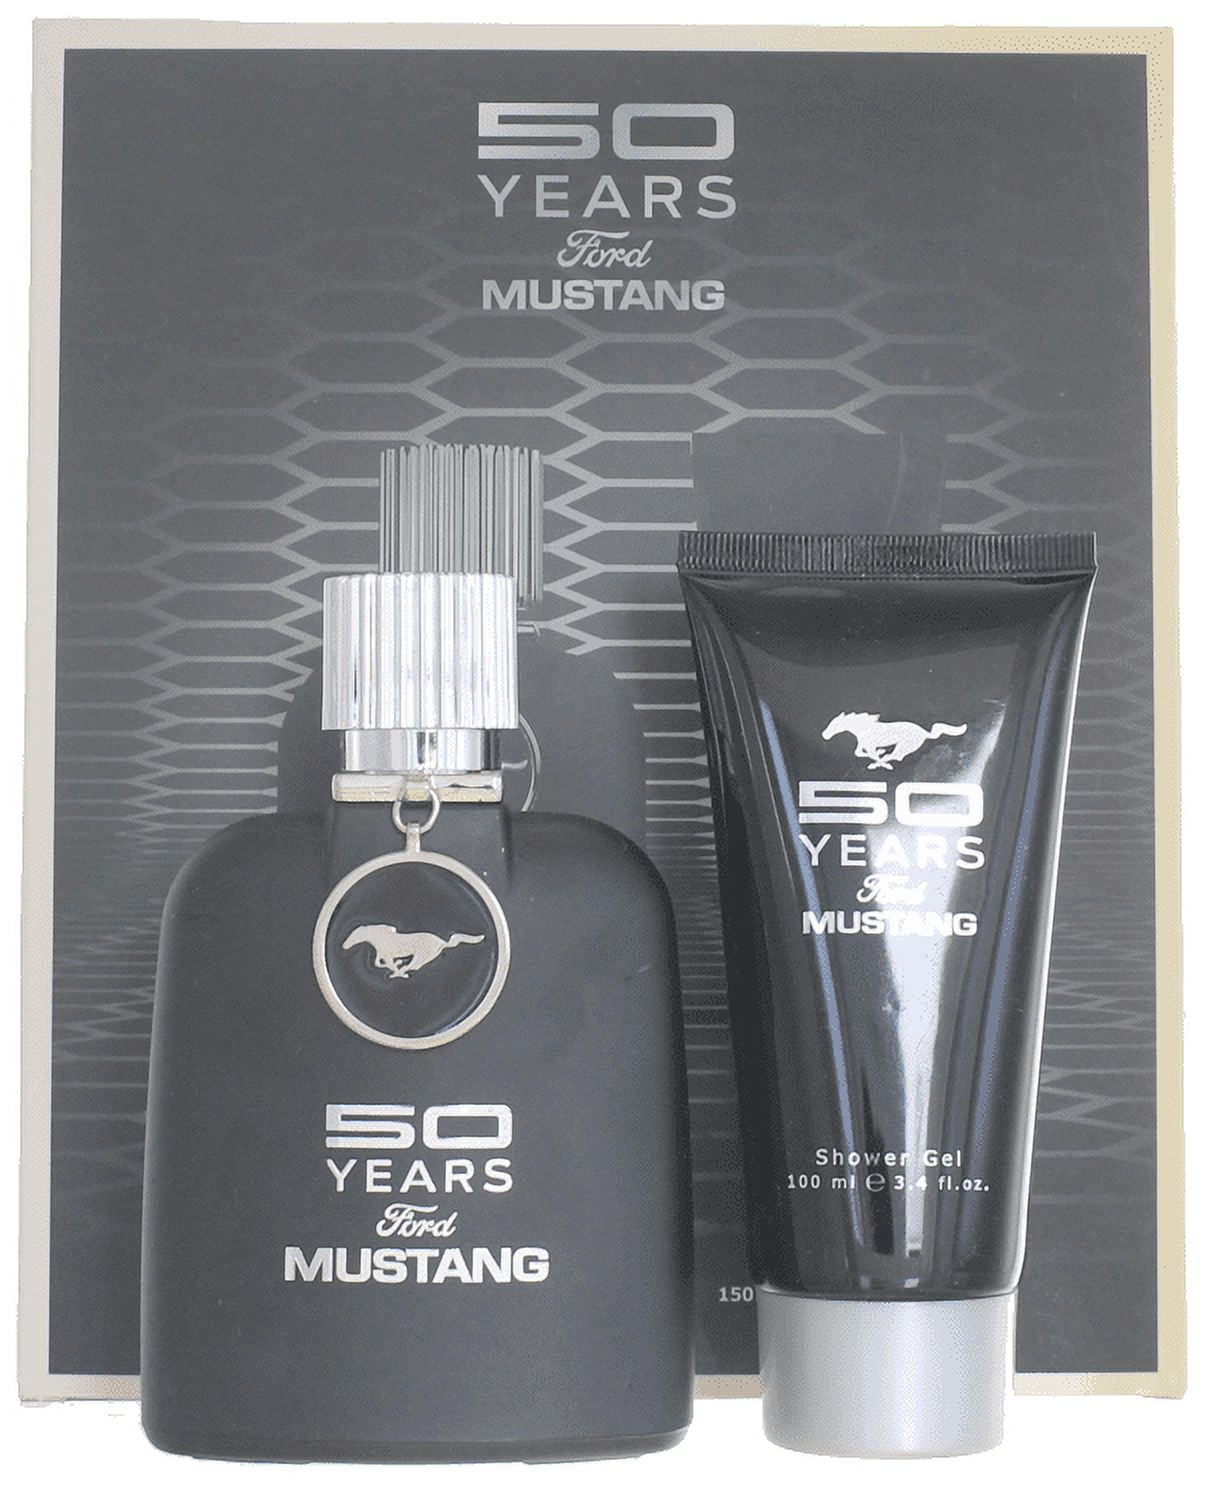 Pour Years Homme 1.7oz+ Ford Mustang EDT For Mustang 50 Shower Set: Men 5.0oz Gel By Ford